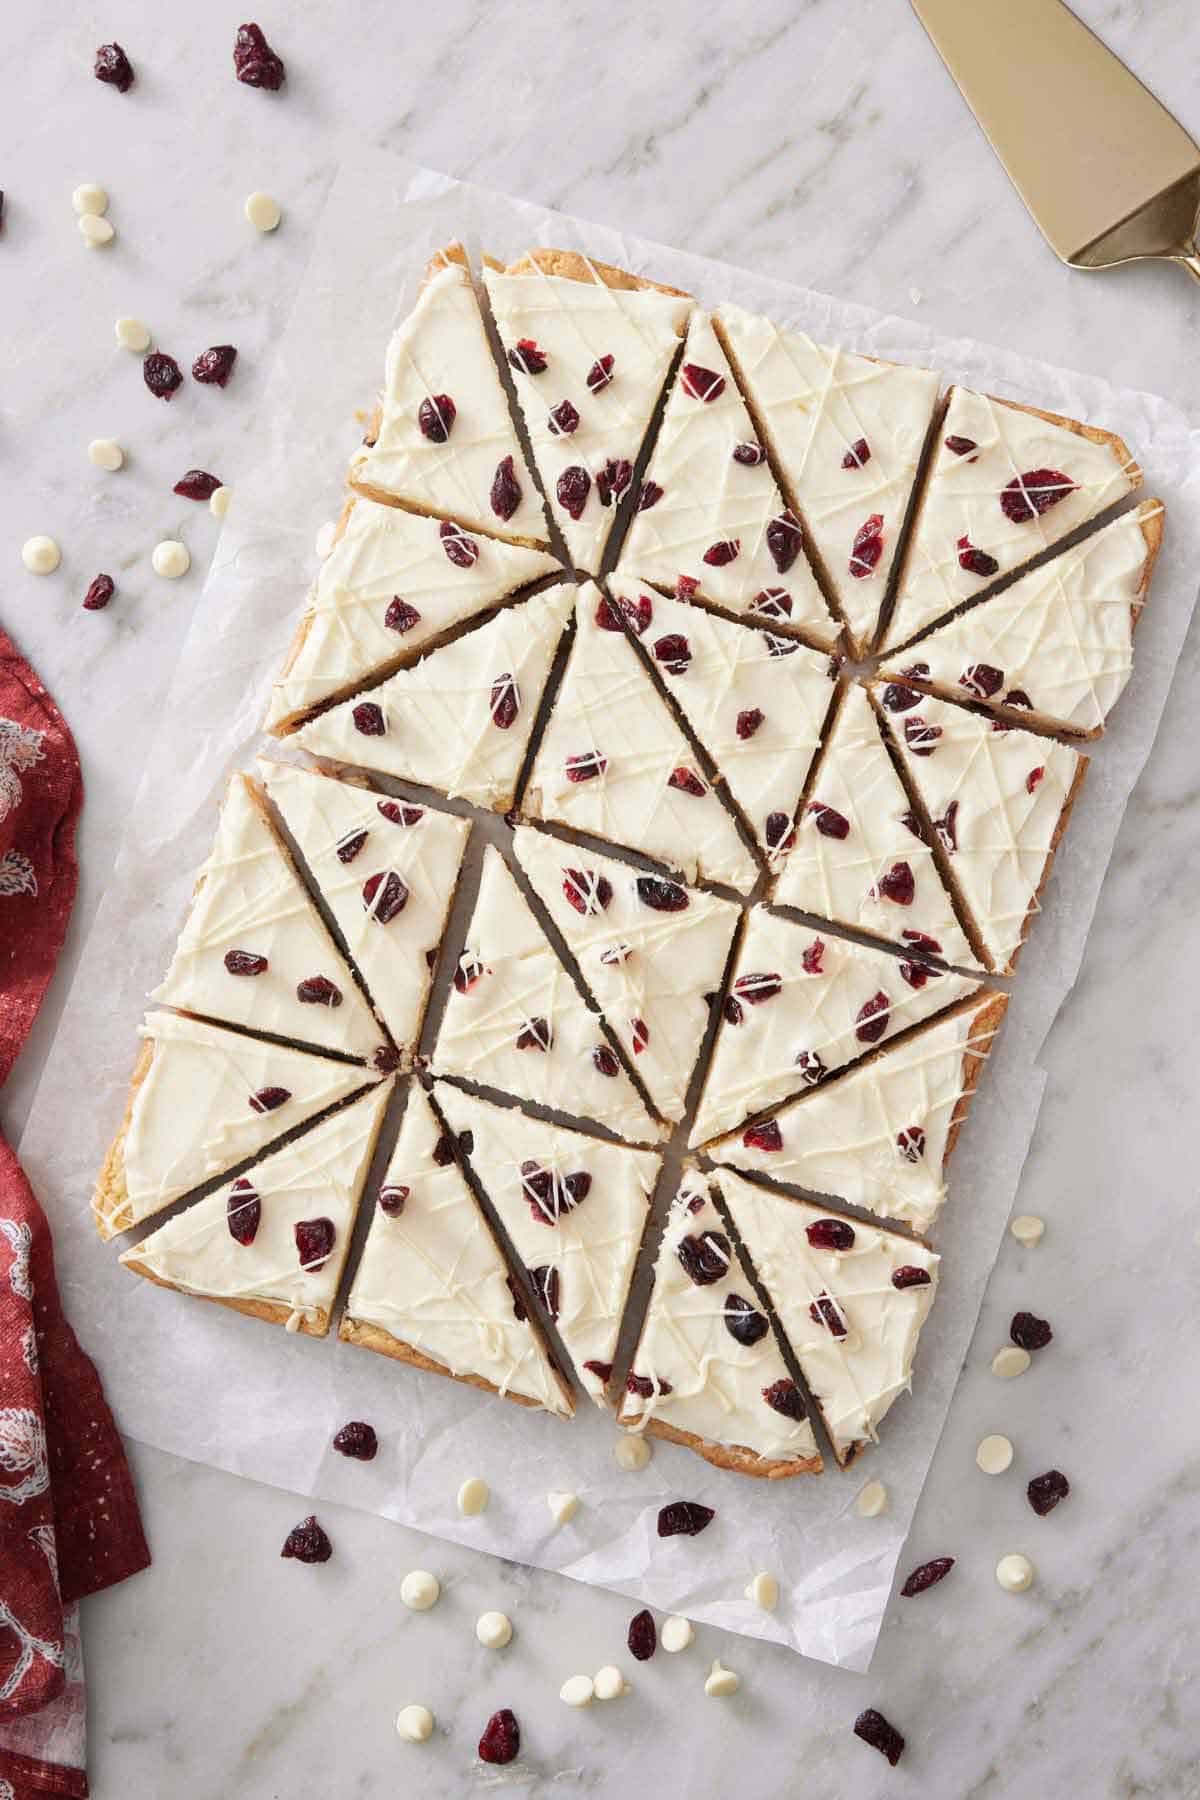 Overhead view of cranberry bliss bars on a parchment paper over a marble counter.